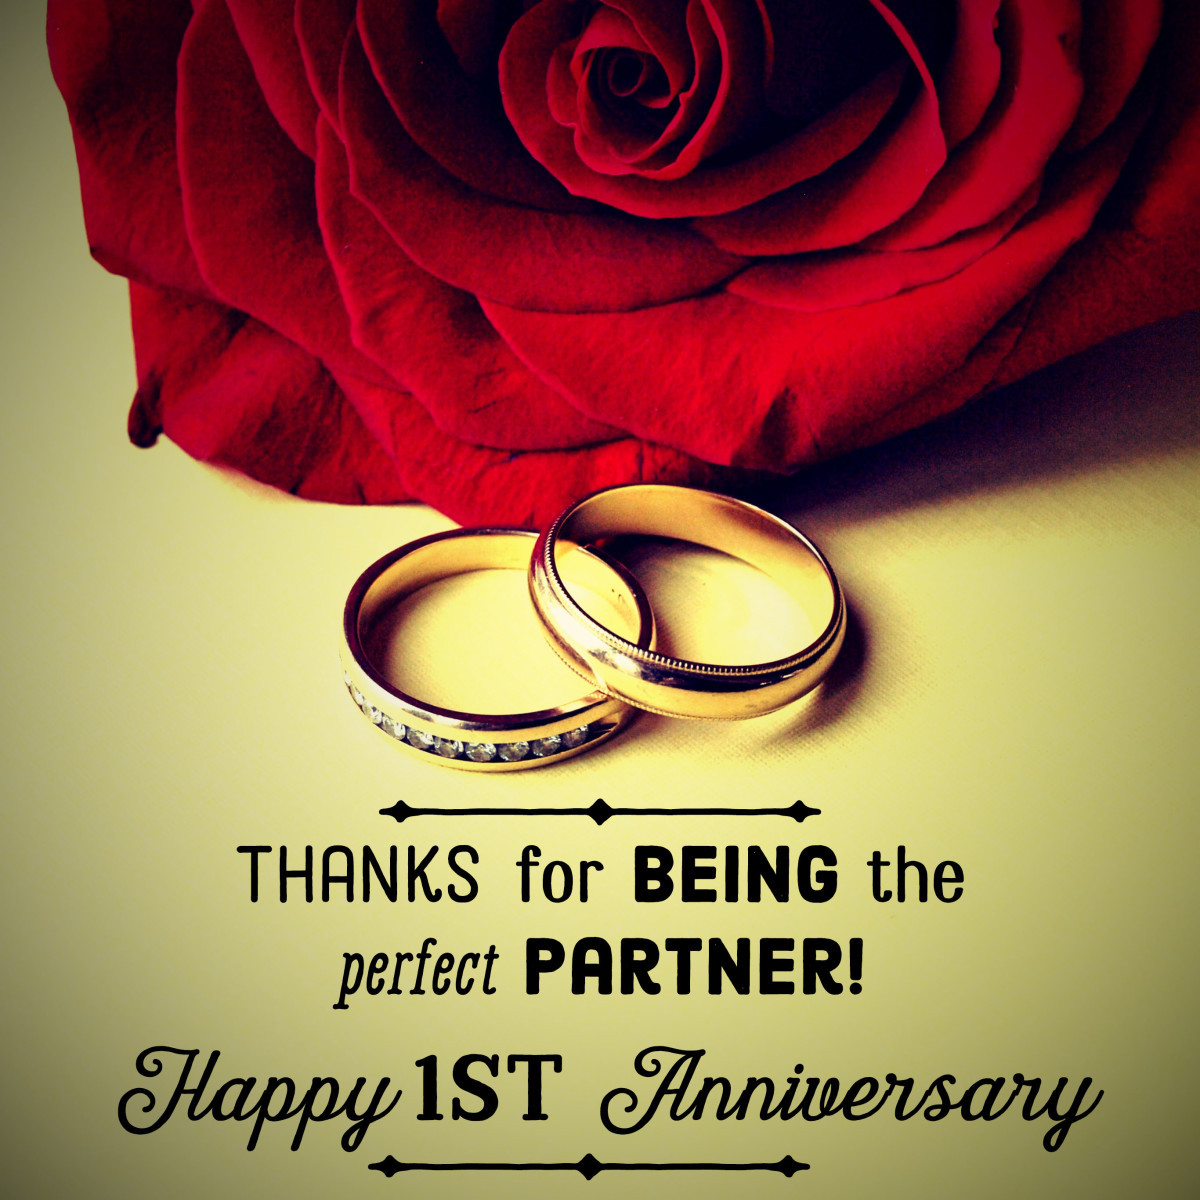 One Year Wedding Anniversary Quotes
 First Anniversary Quotes and Messages for Him and Her